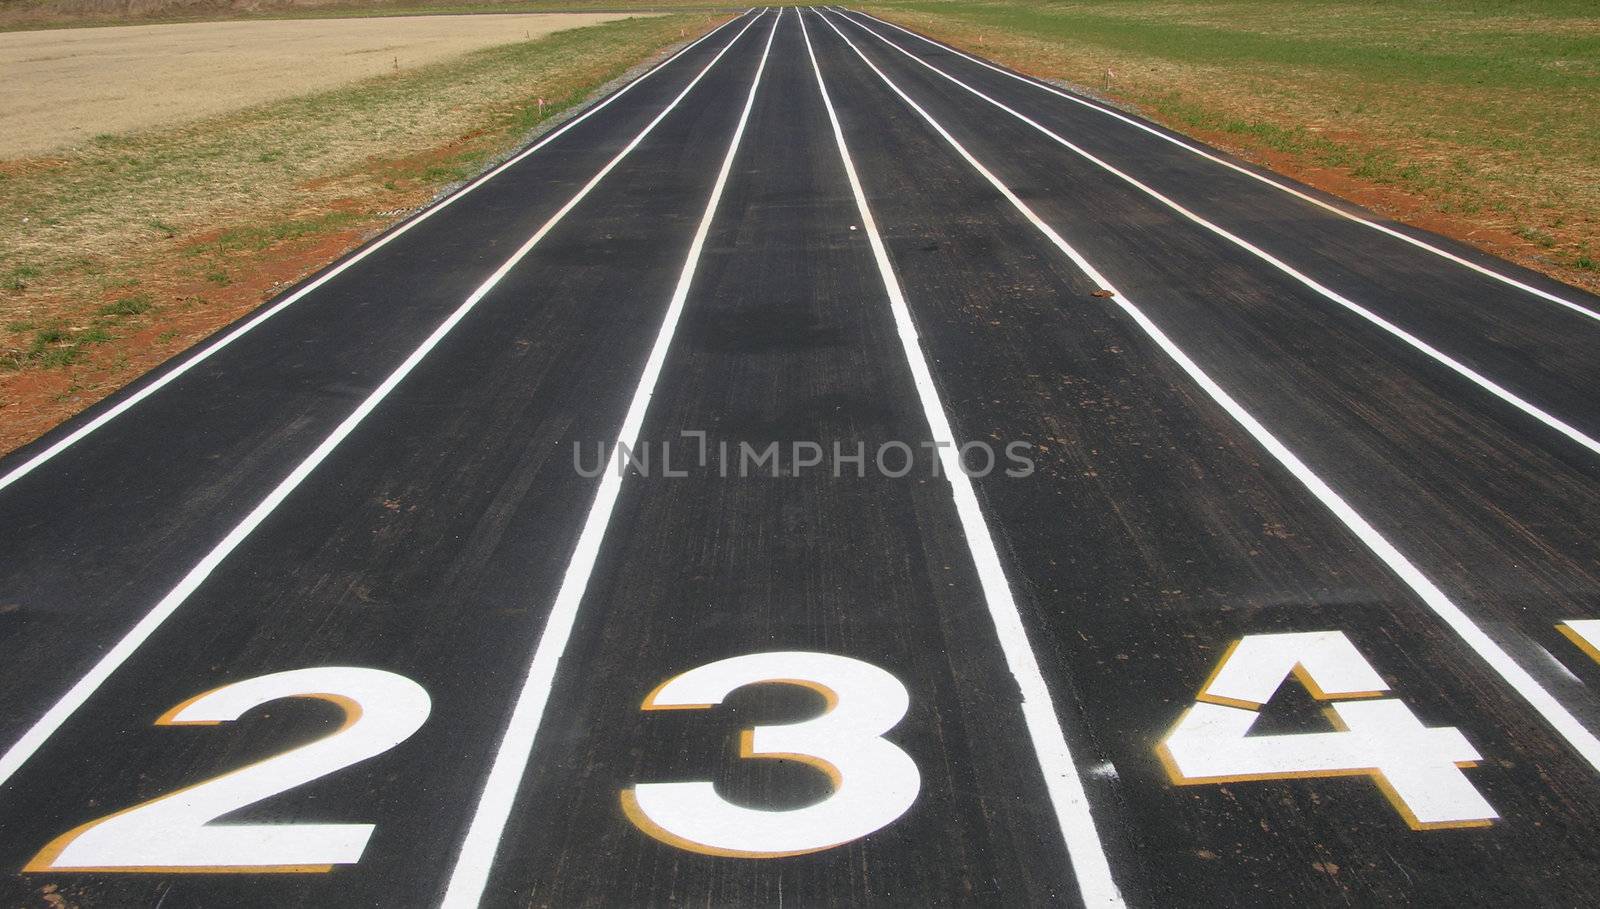 A view of a running track with numbers and lanes